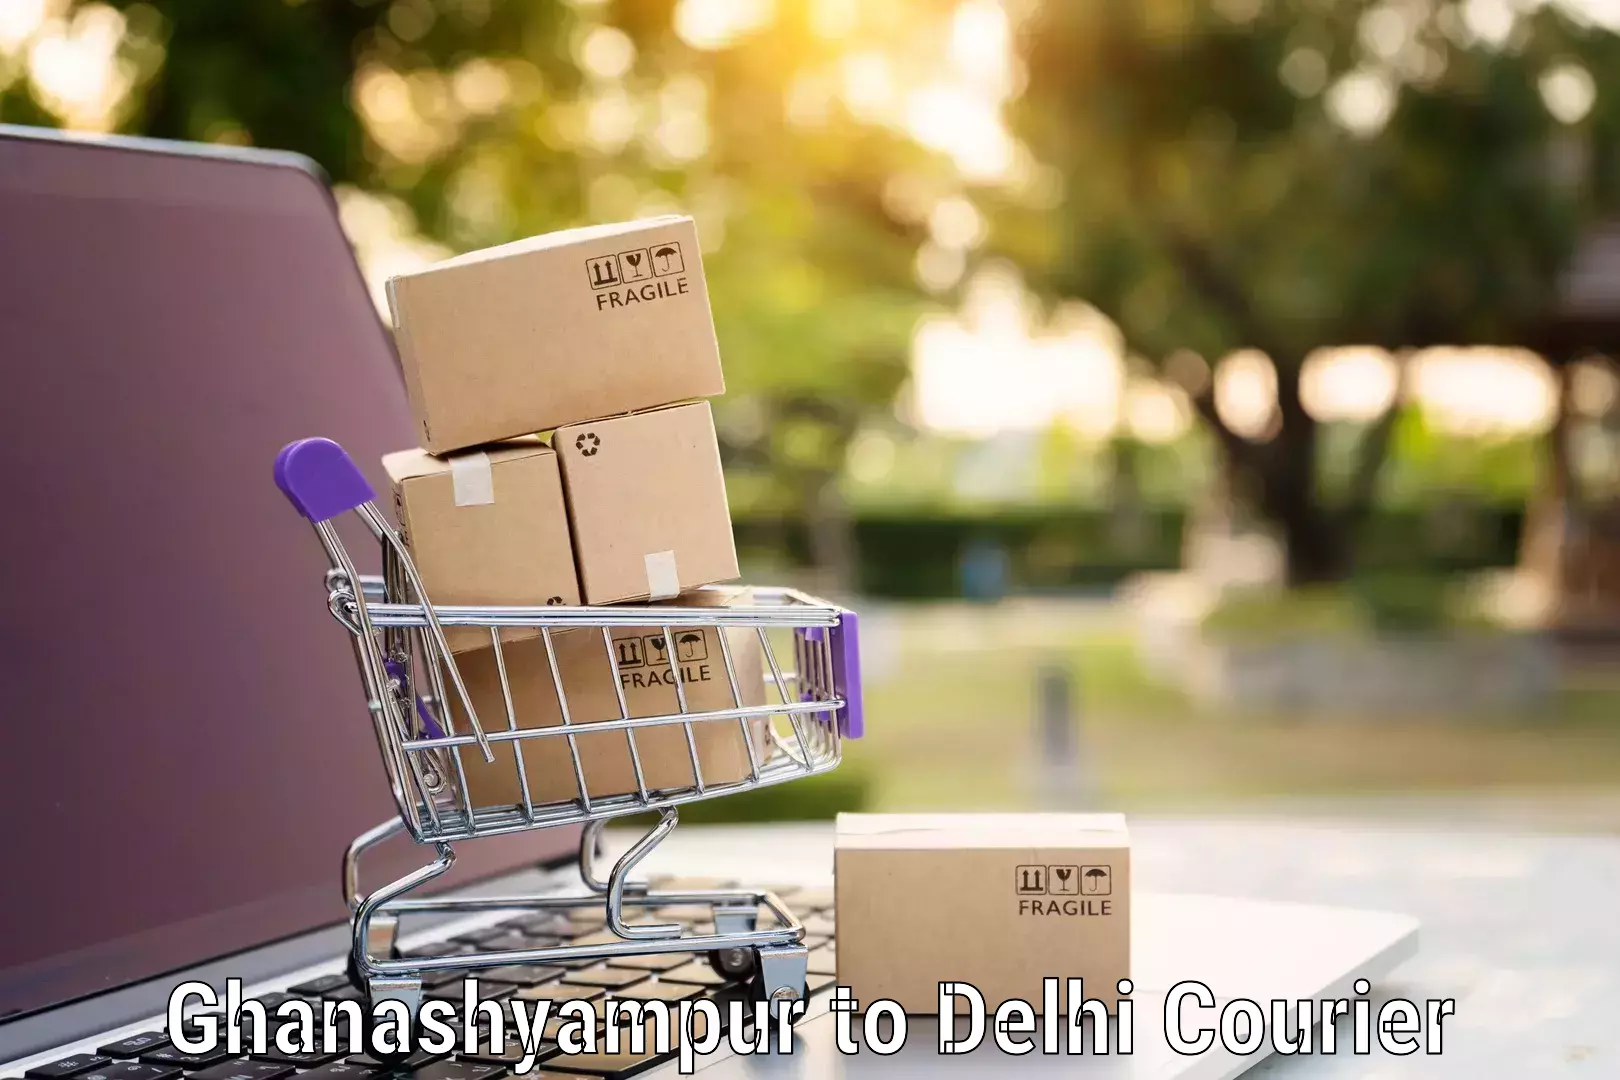 Furniture moving experts Ghanashyampur to Delhi